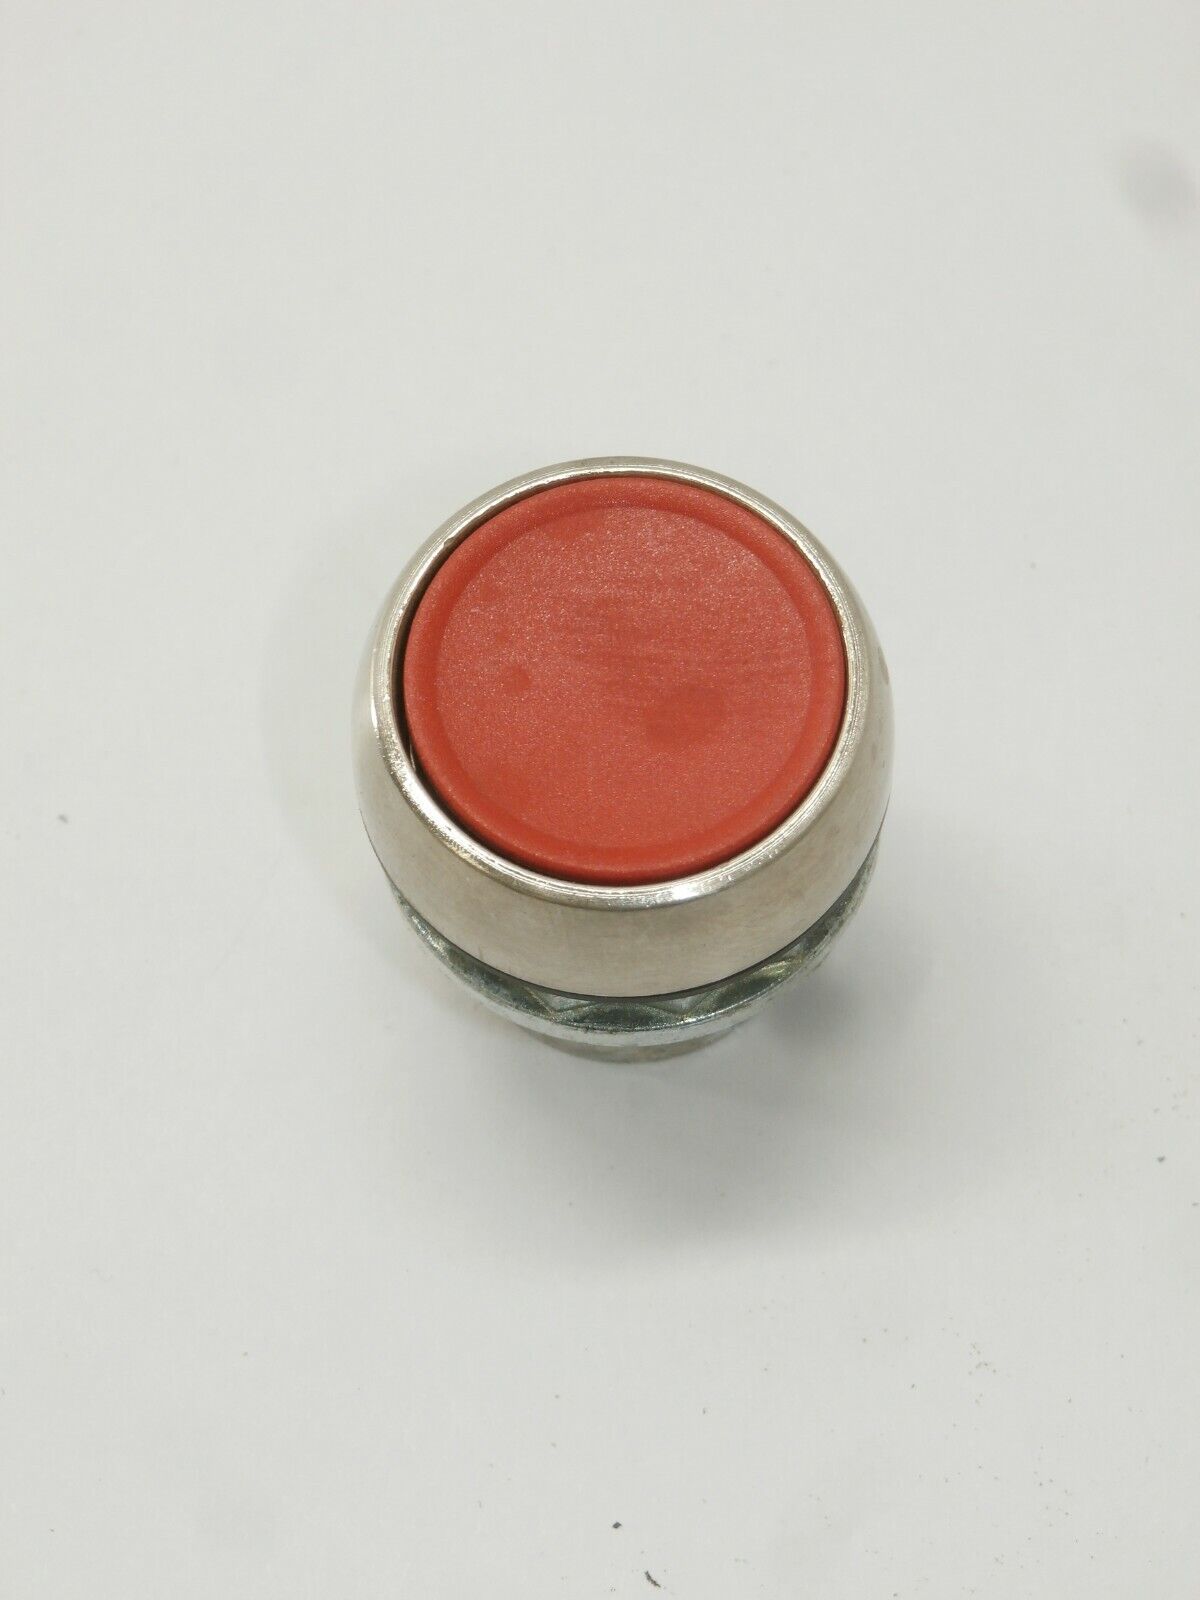 Haas Automation CSMD CNC Control Simulator Replacement Red Button